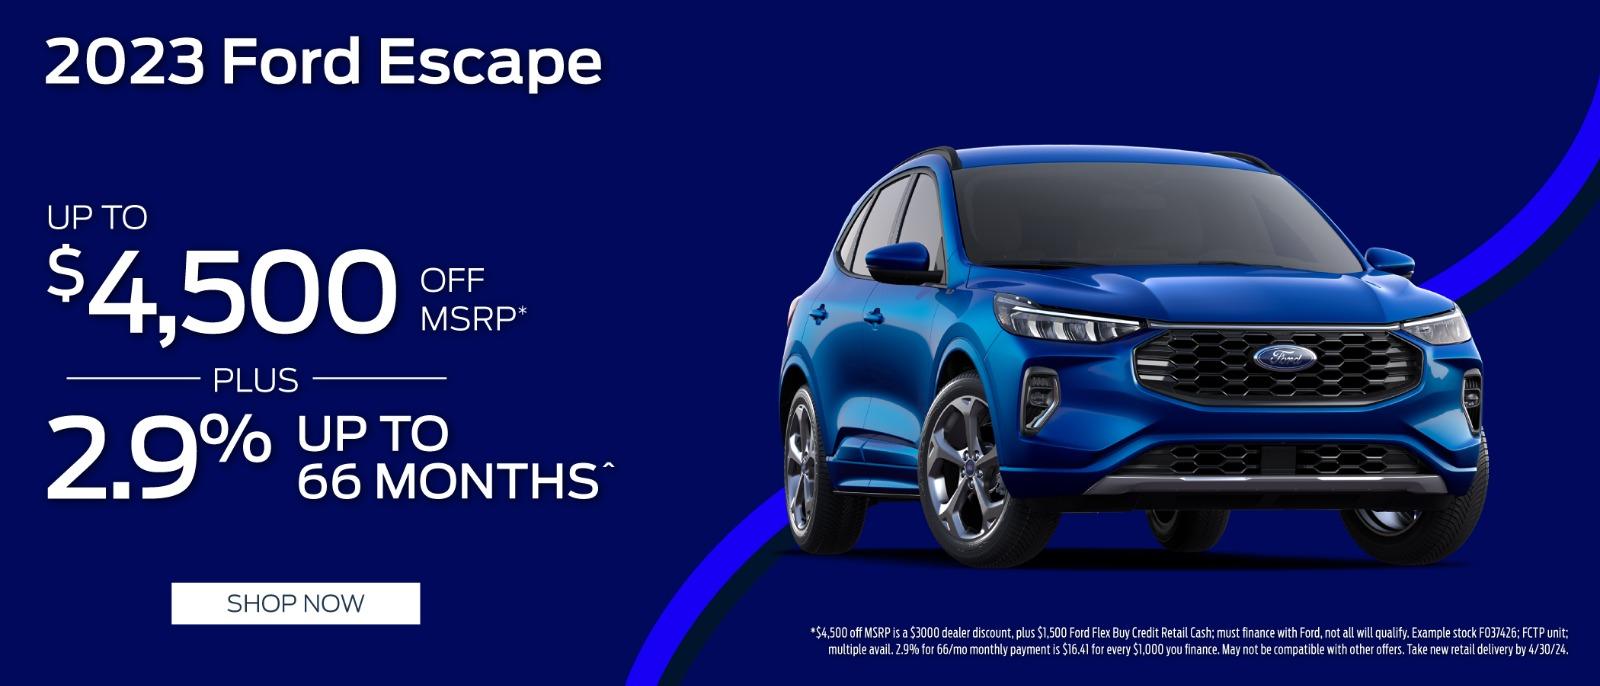 2023 Ford Escape $4,500 off MSRP plus 2.9%up to 66 months